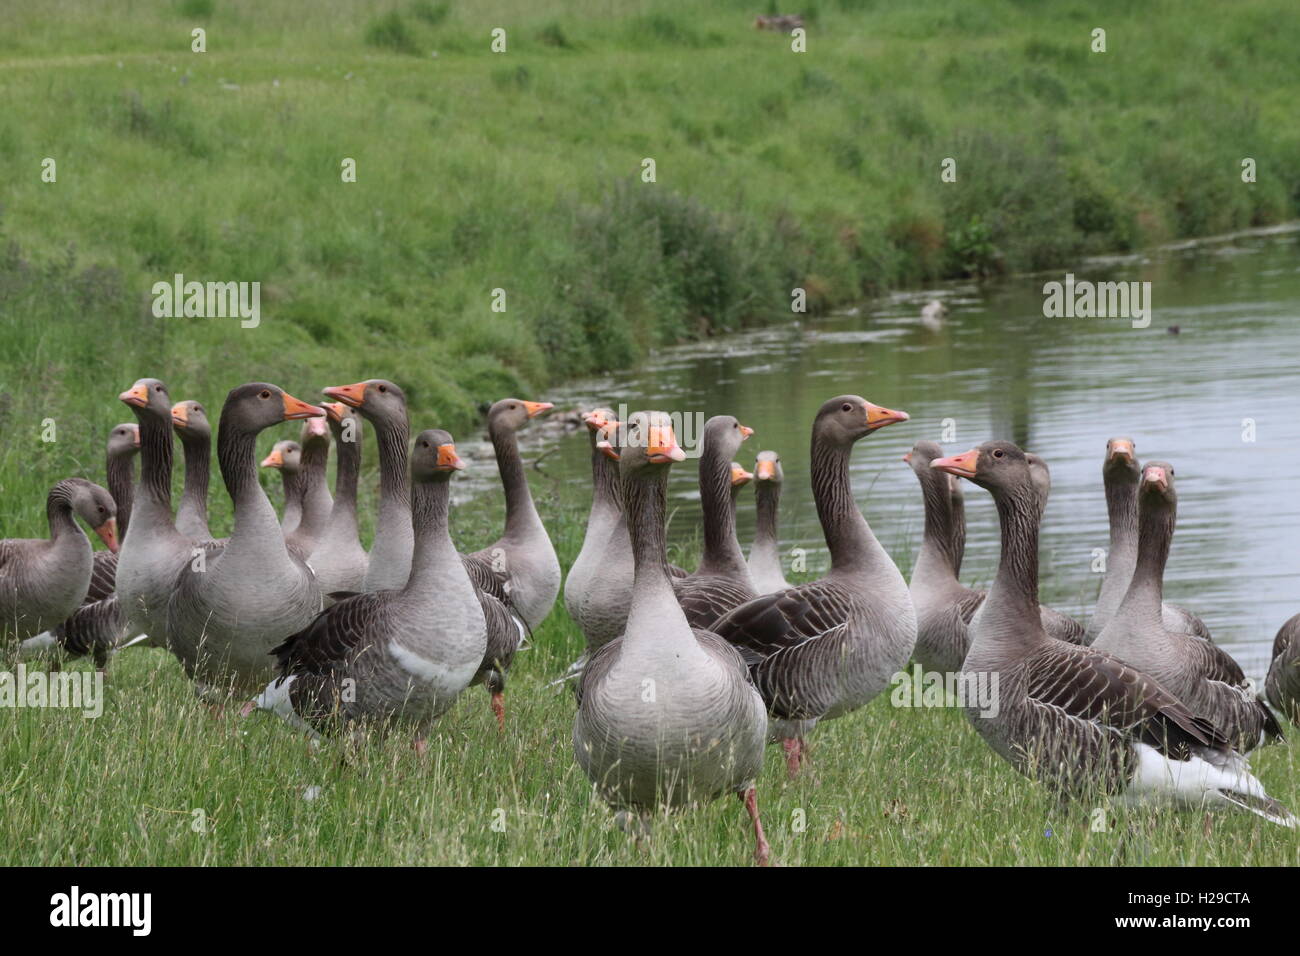 Gaggle of geese next to a lake Stock Photo